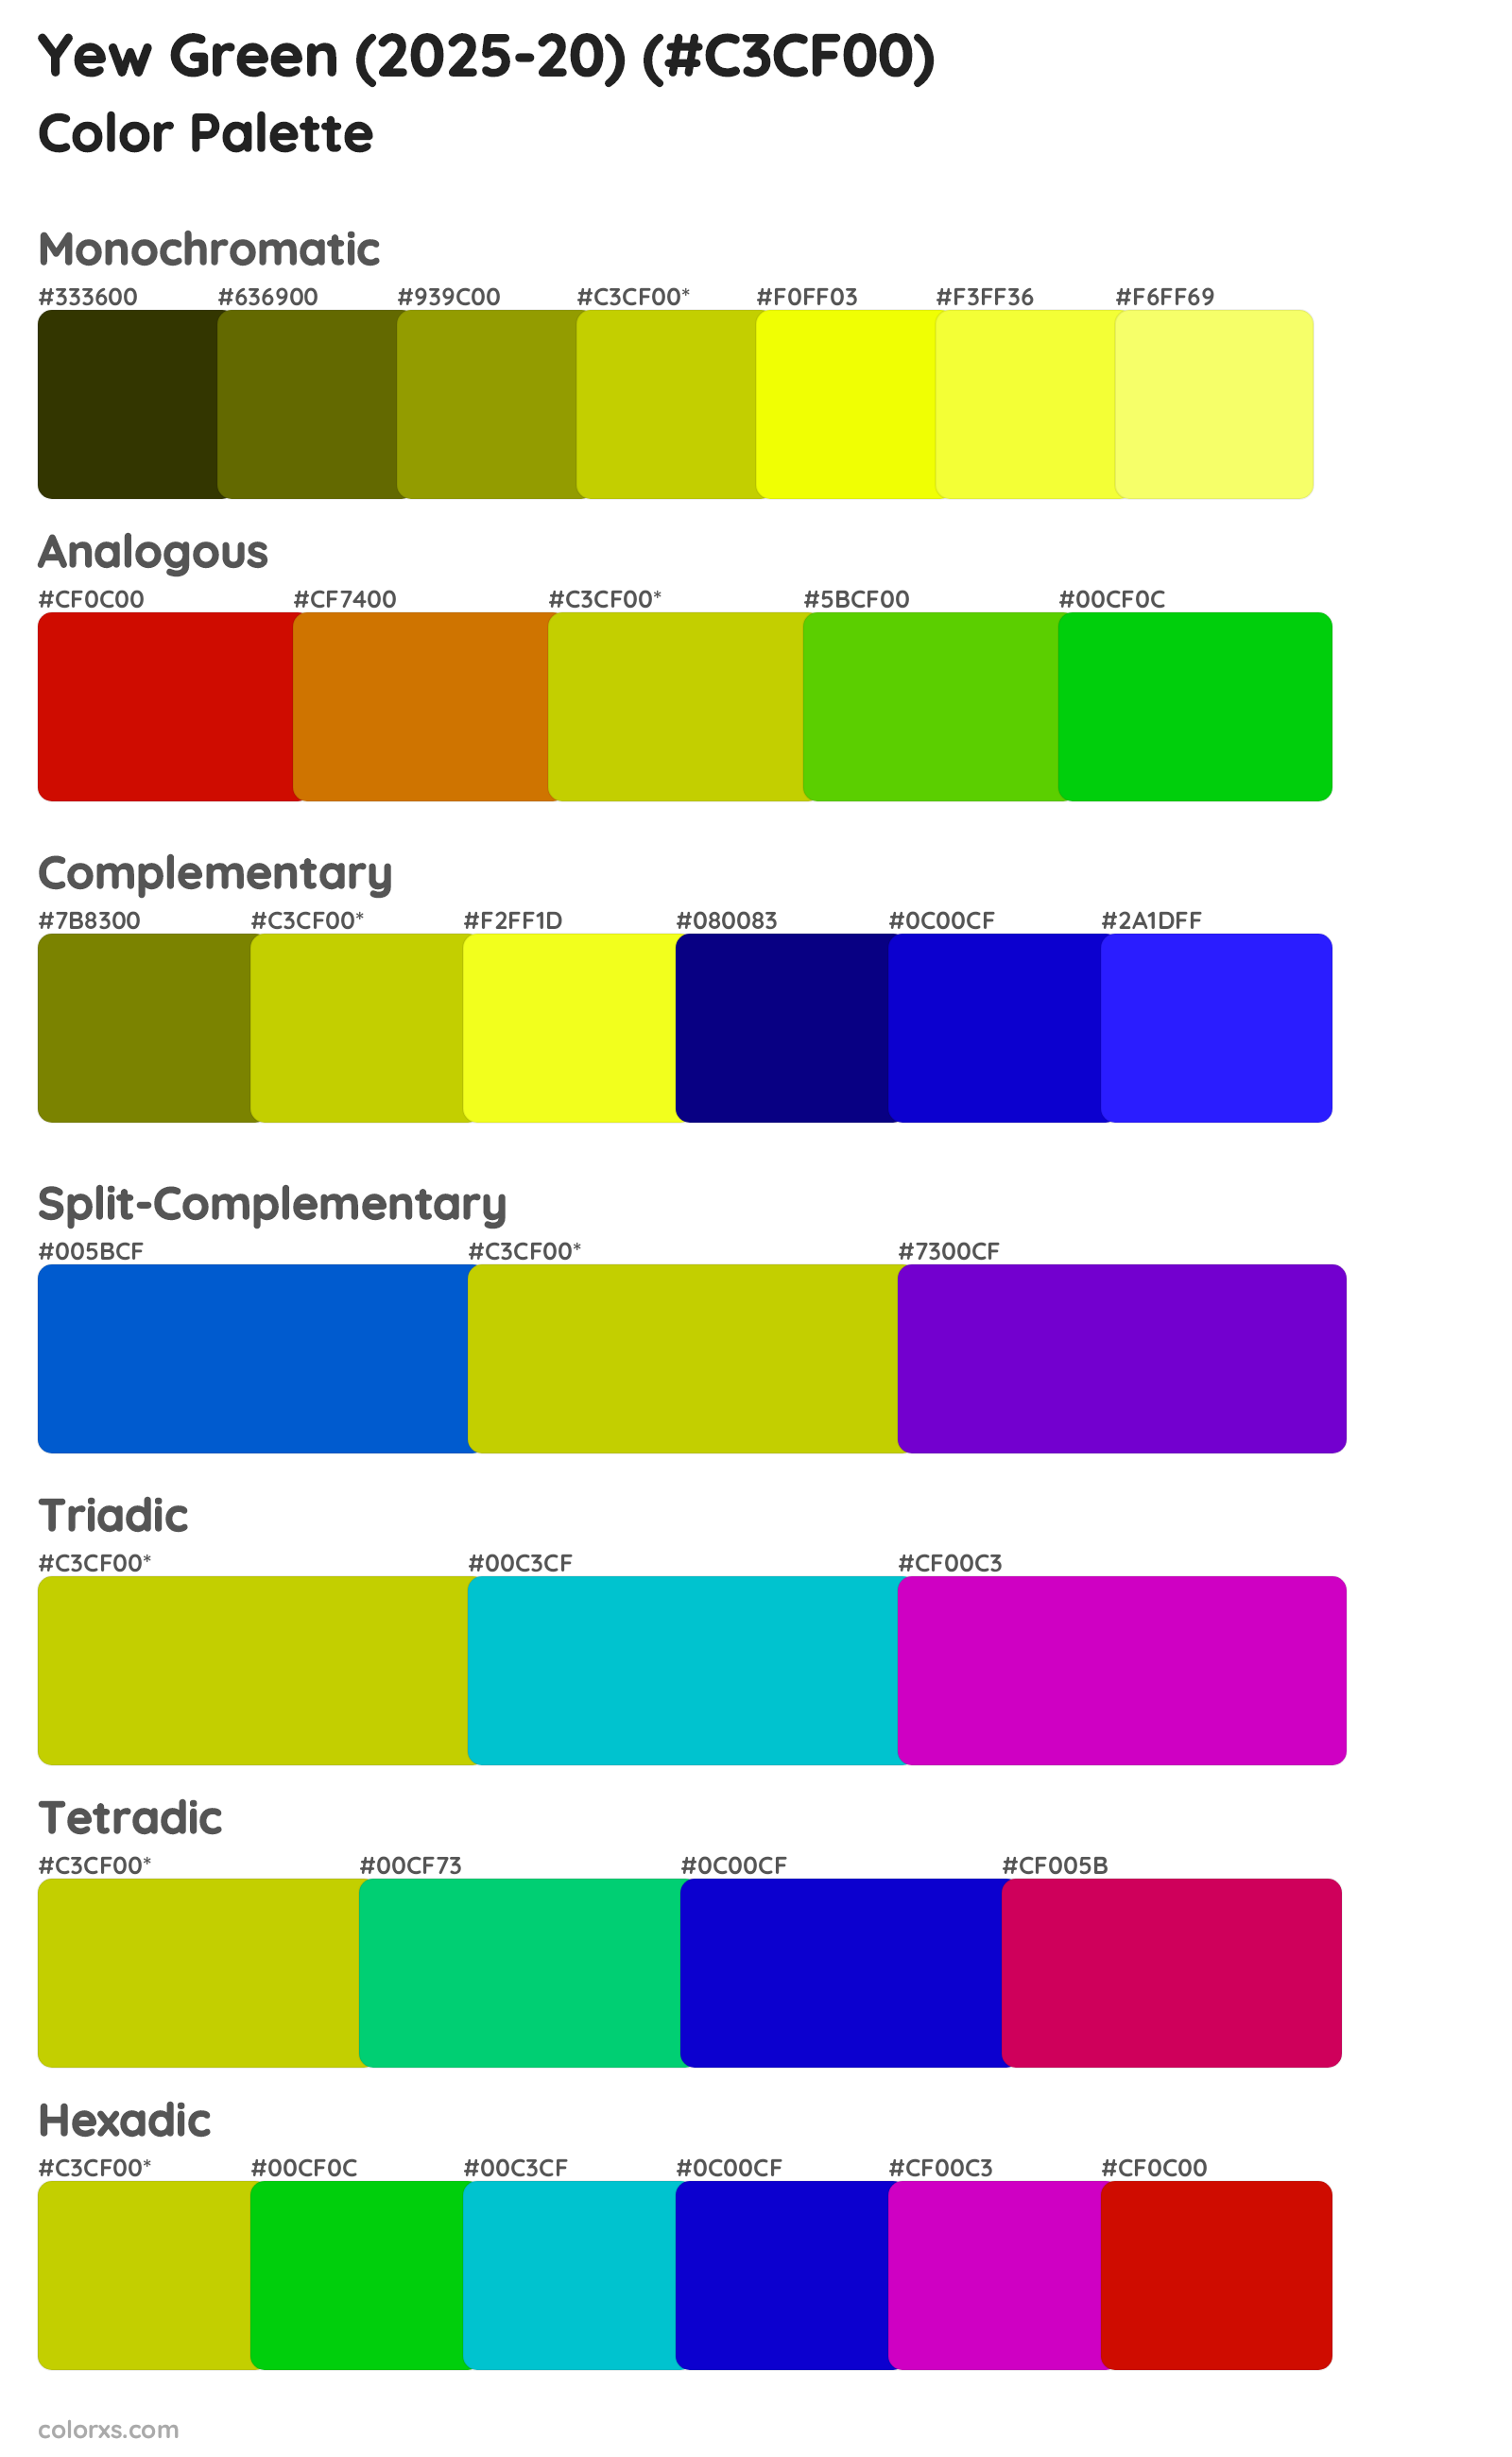 Yew Green (2025-20) Color Scheme Palettes